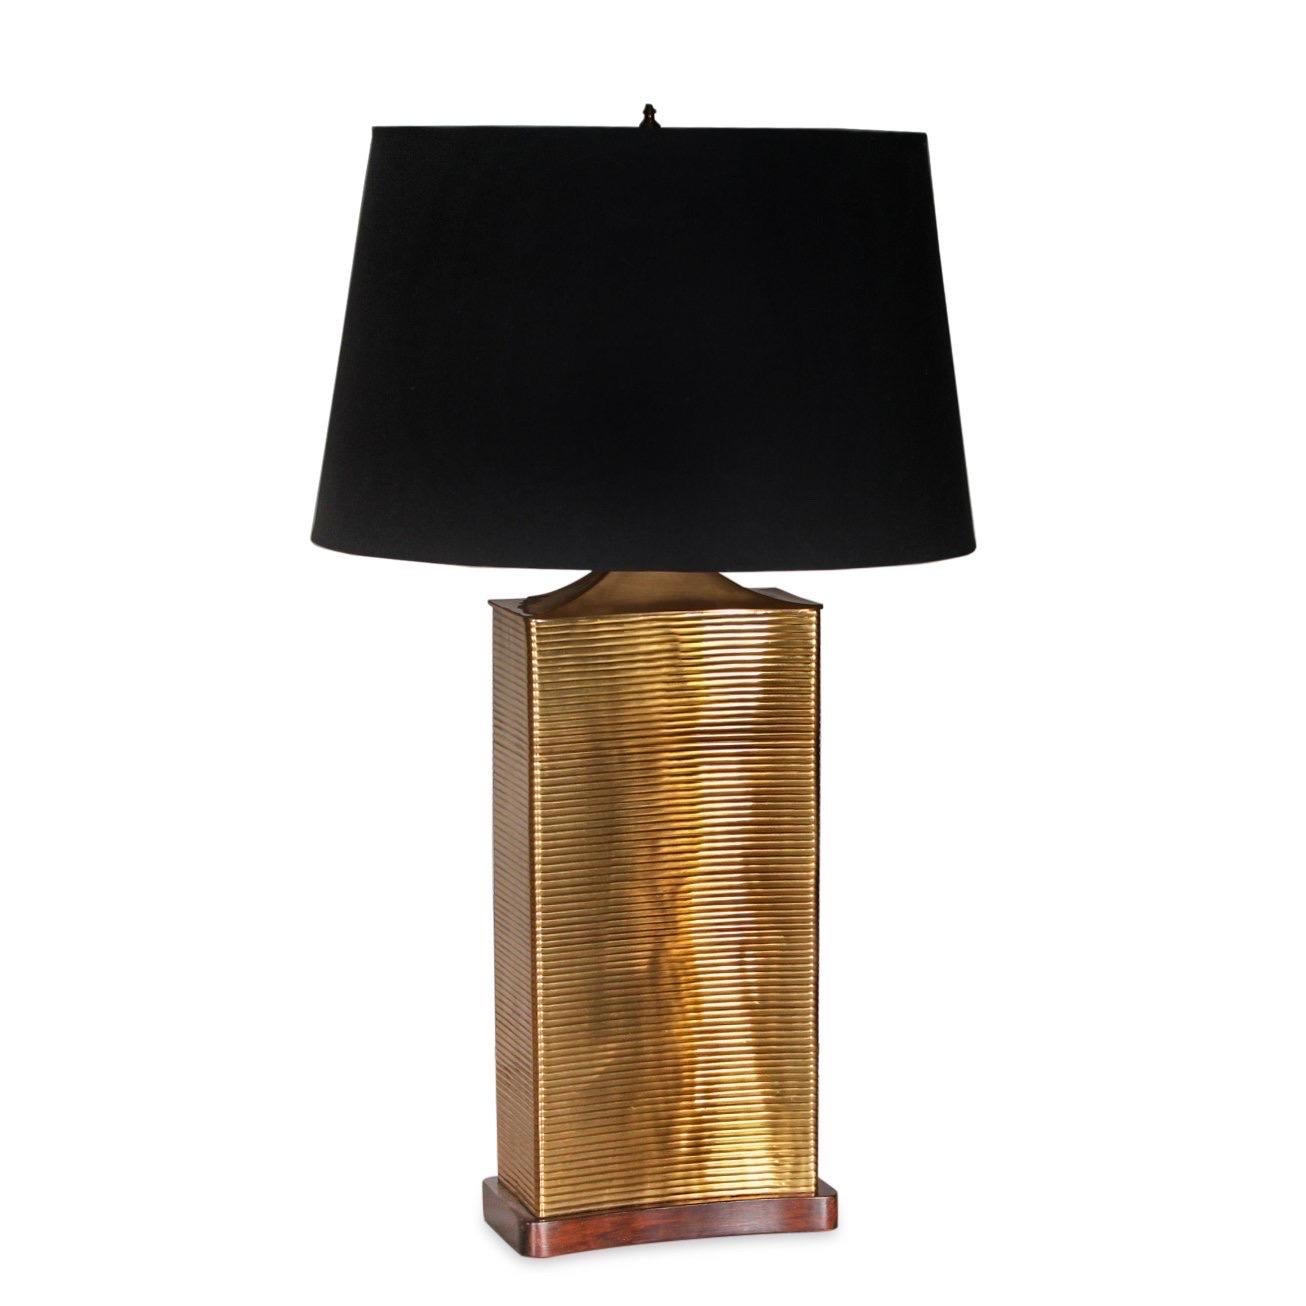 Frederick Cooper uptown brass table lamp, circa 2000.

Features ribbed body in antique brass finish, walnut base and a black silkette shade.

Dimensions with shade: 14”L x 14”W x 29”H 
Base: 8.5”L x 4.5”W.

